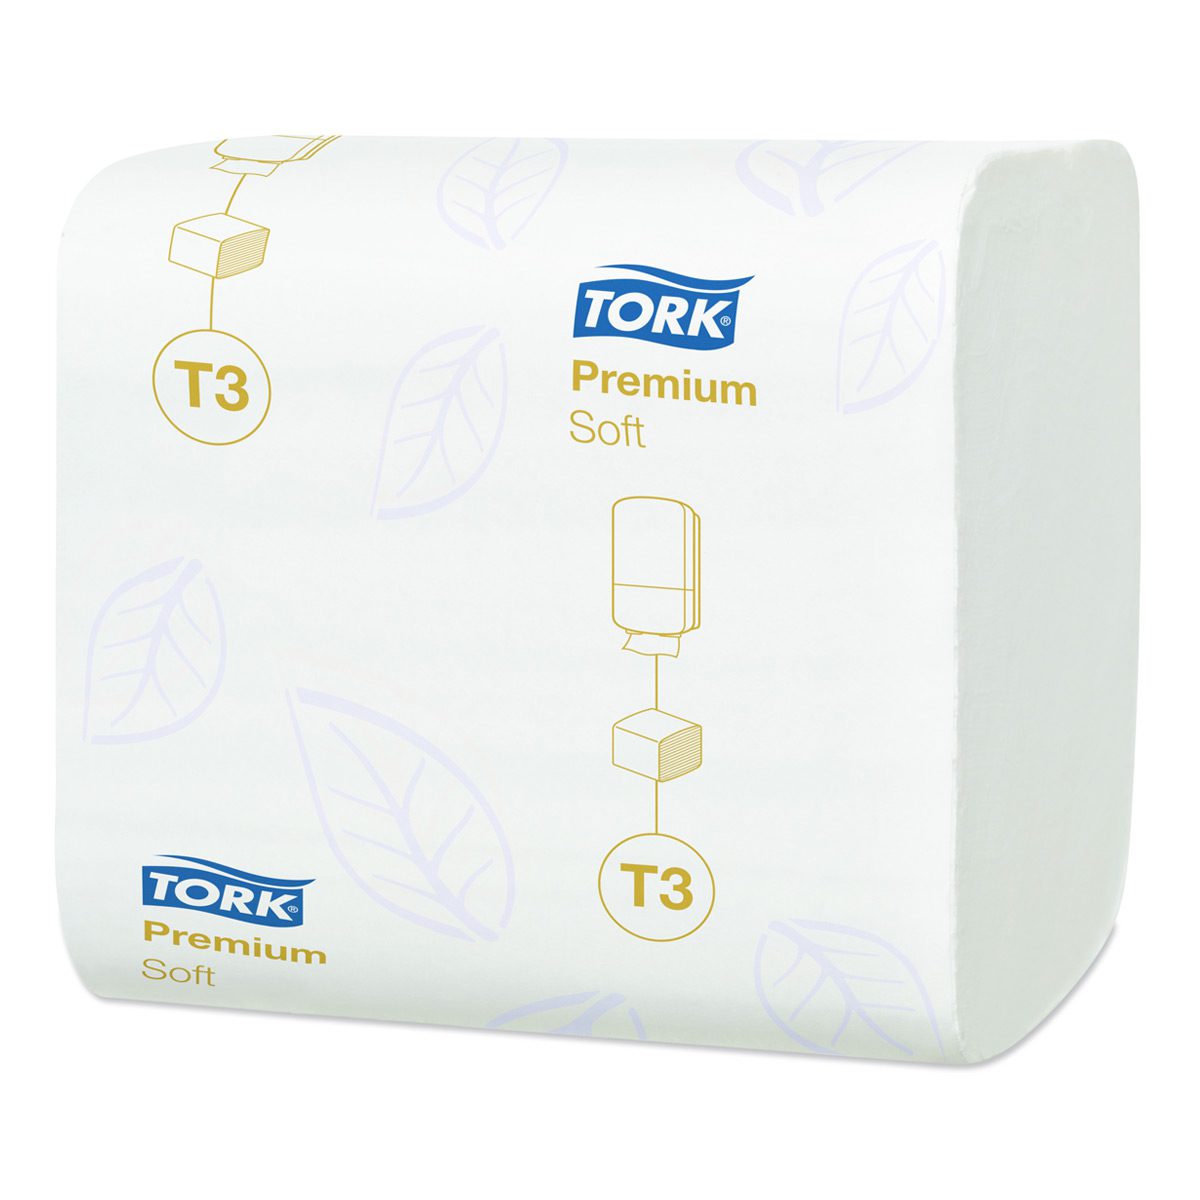 paper-products-toilet-paper-tork-soft-folded-toilet-paper-premium-white-2-ply-252-sheets-hygienic-sheet-by-sheet-dispensing-reduces-waste-healthcare-horace-environments-vjs-distributors-114273